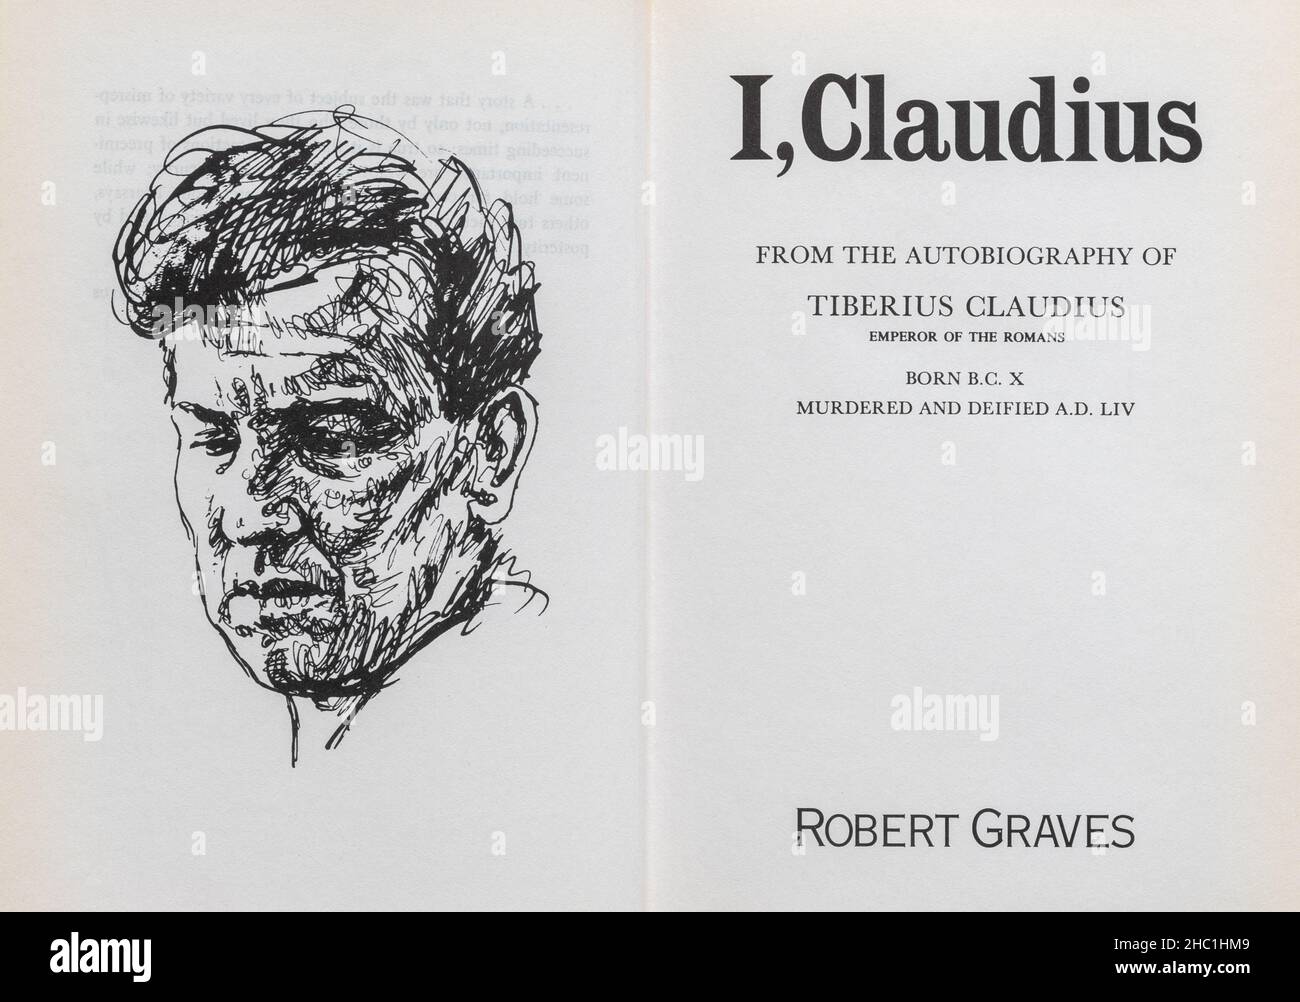 I, Claudius book - classic novel by Robert Graves. Title page and drawing of the author. Stock Photo